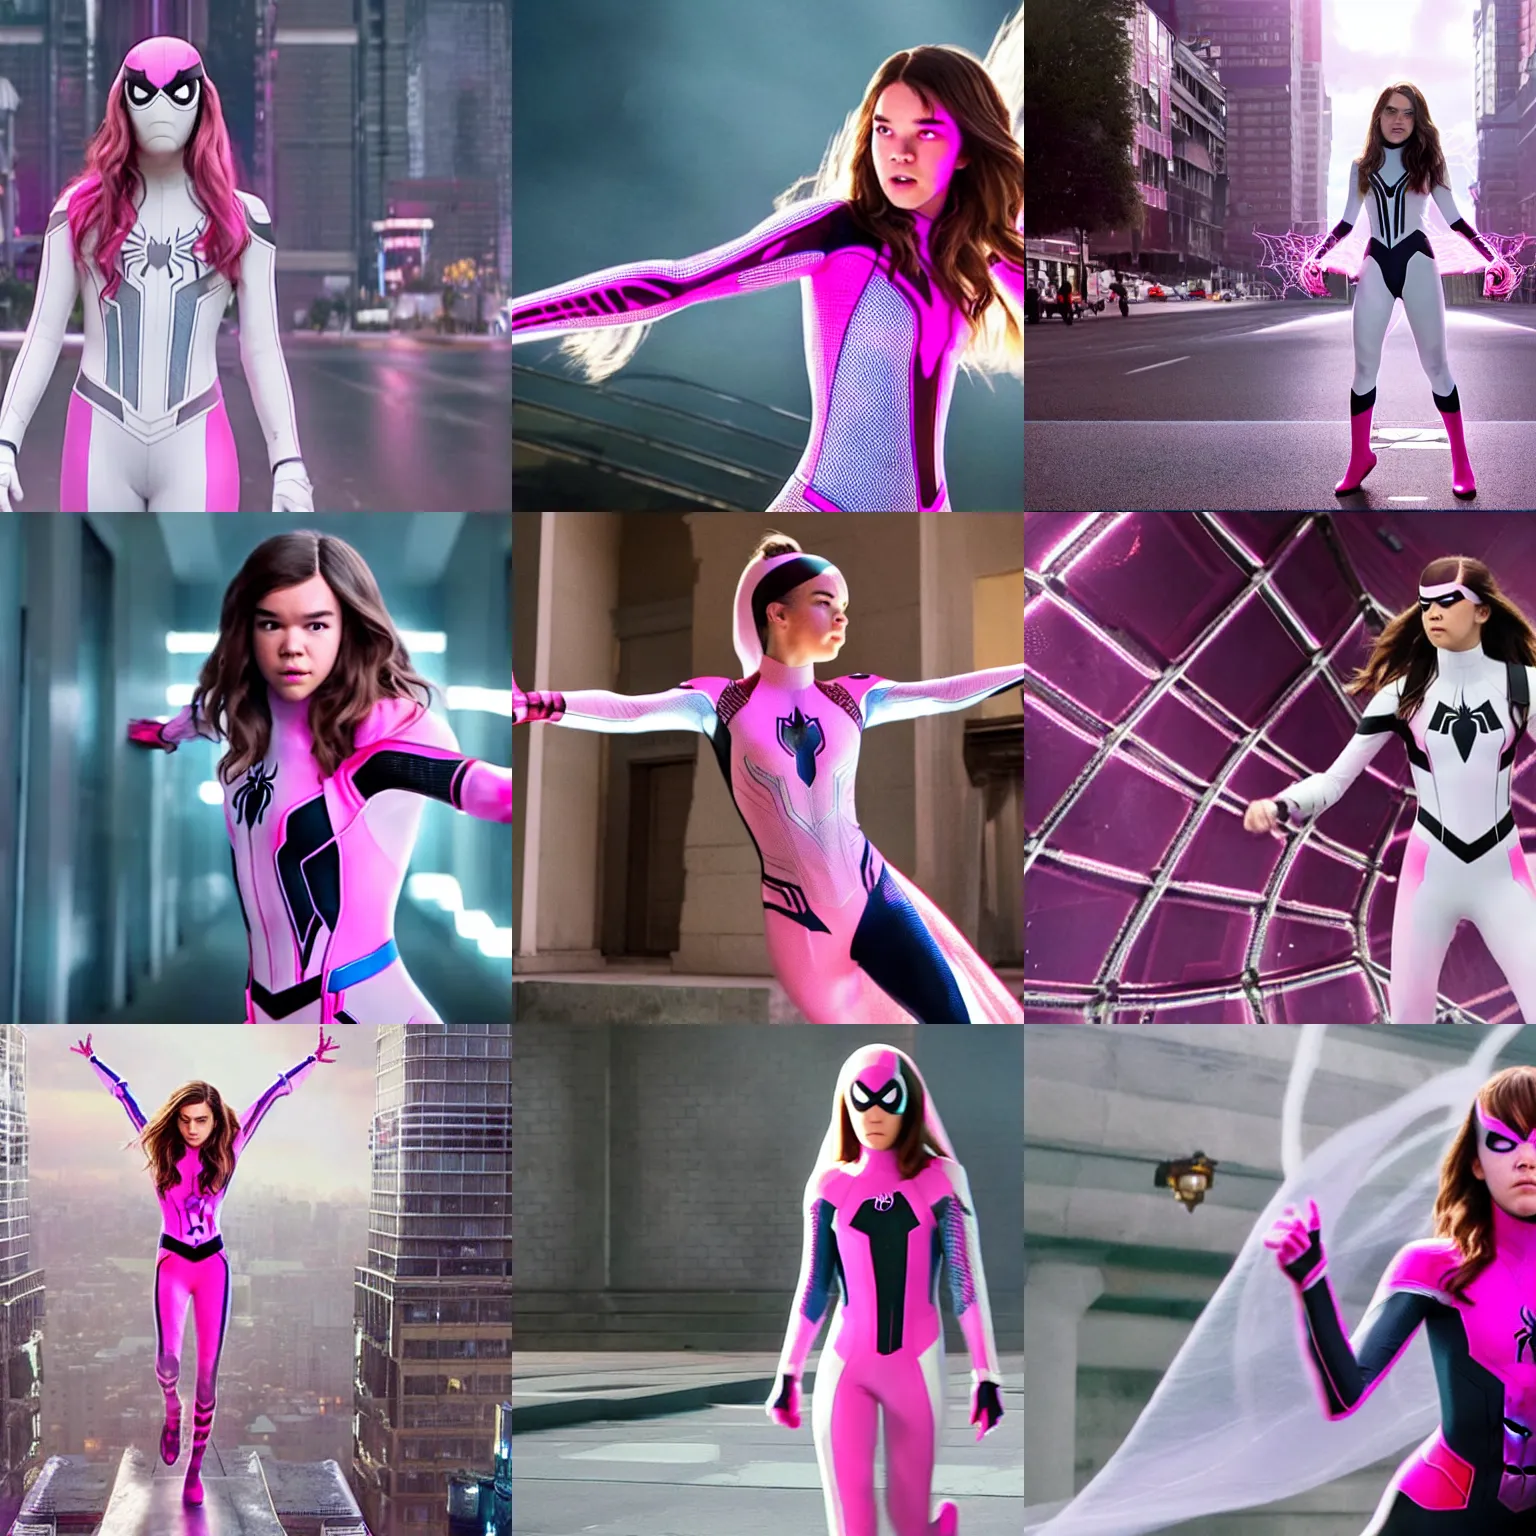 Prompt: Hailee Steinfeld as Spider-Gwen, wearing a white and pink costume, film still from Spiderman: Far From Home